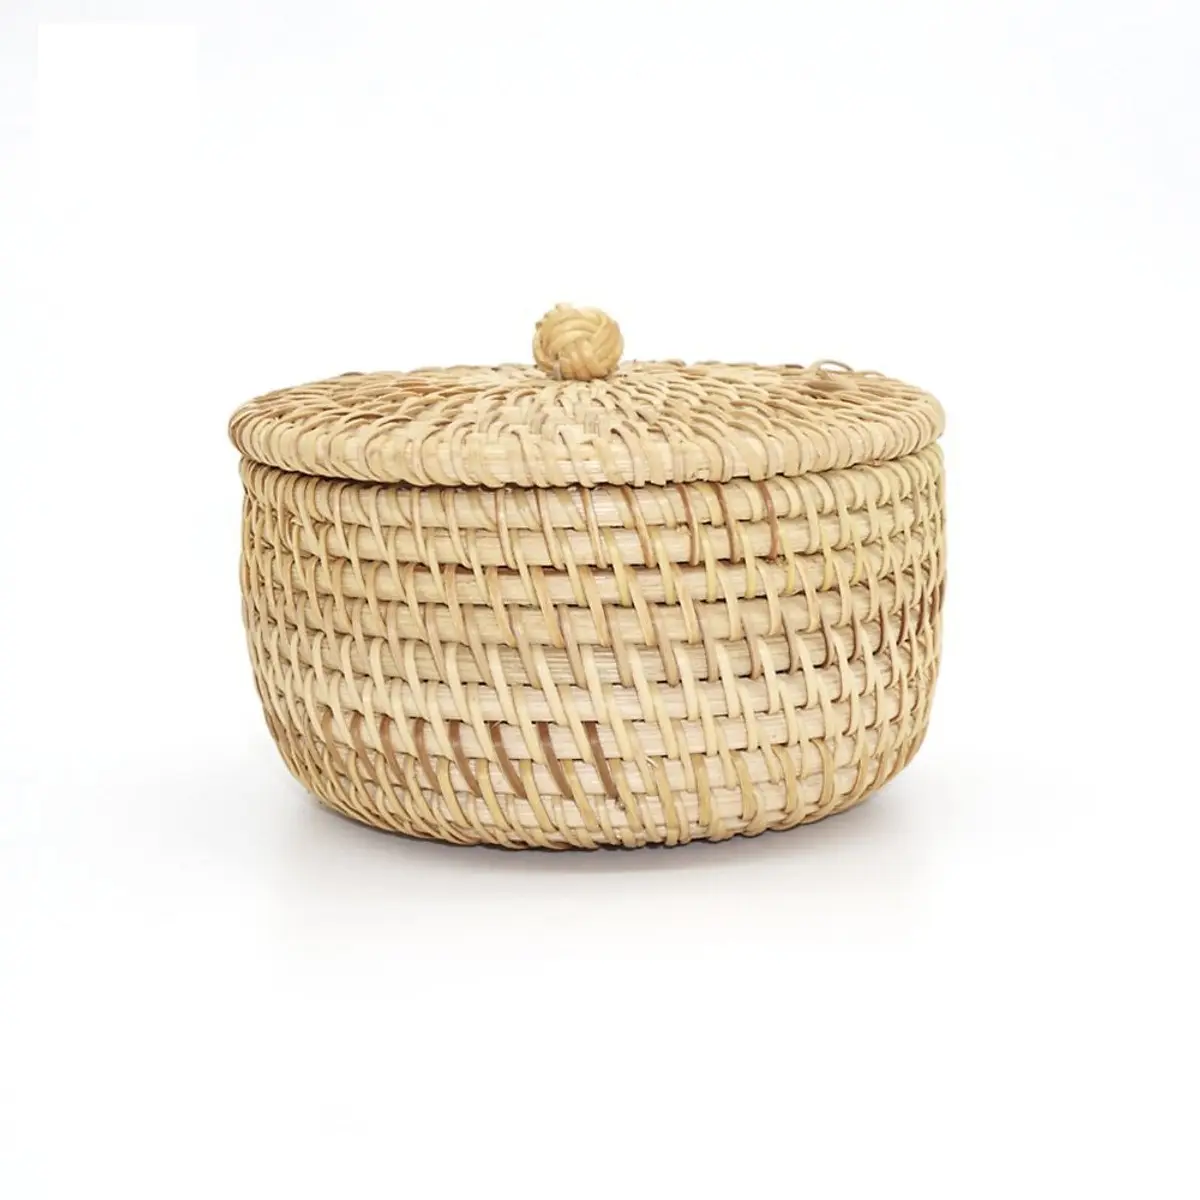 Small rattan wicker boxes for storage products cake candy biscuit cookies container natural box